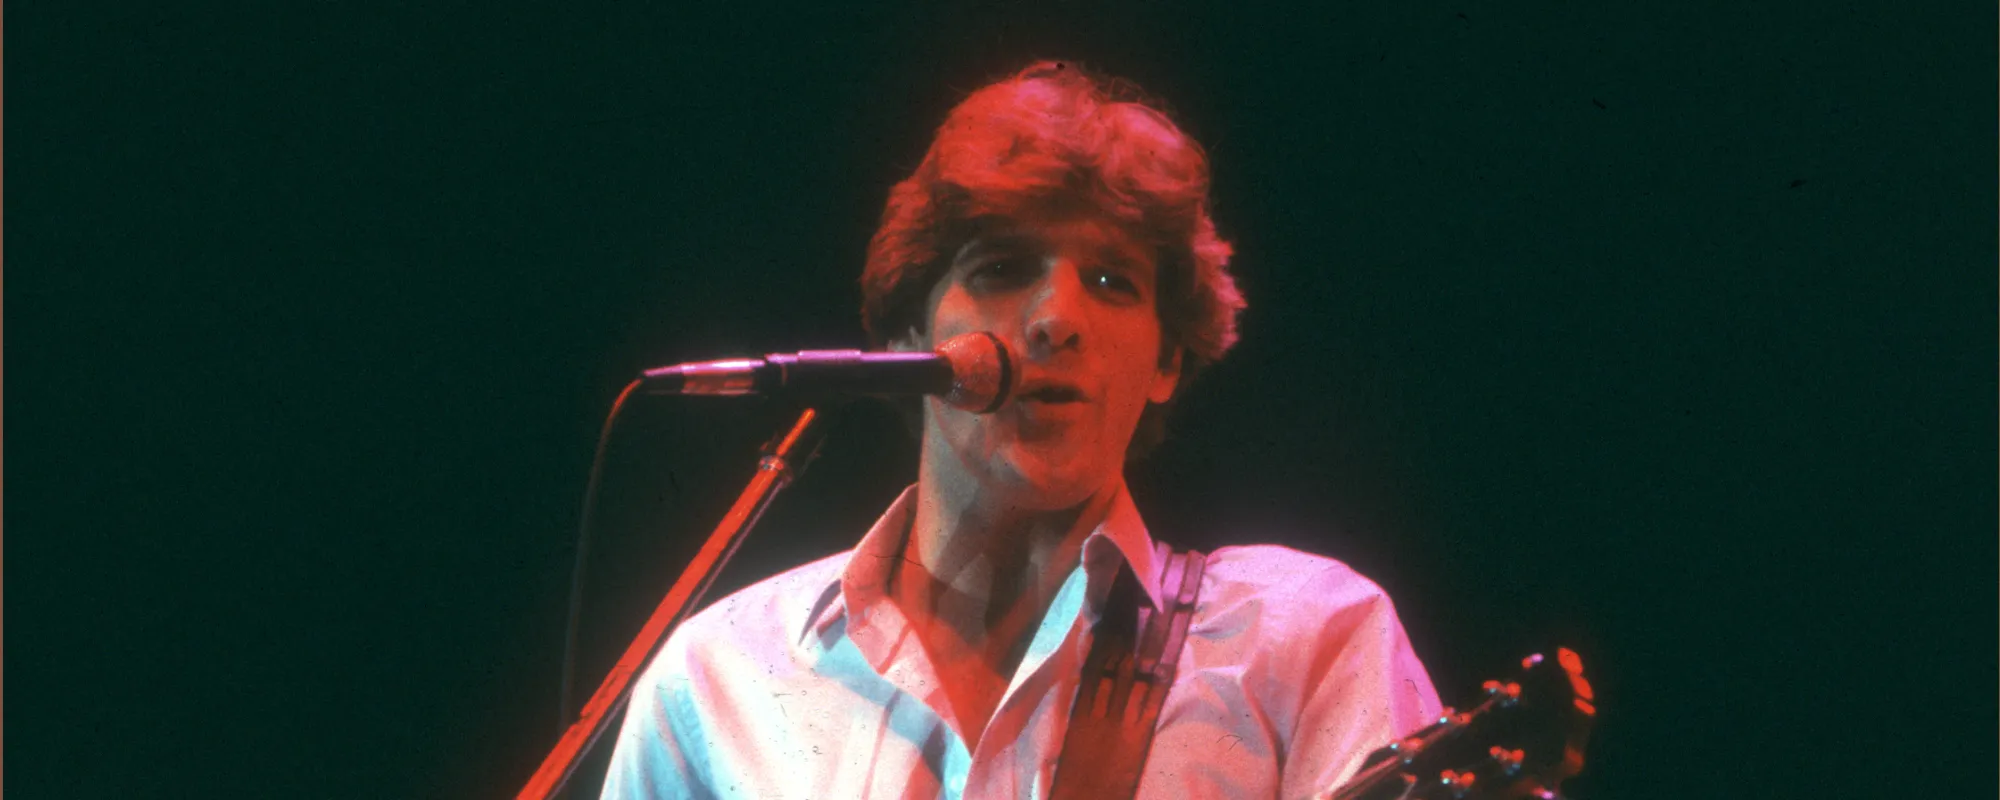 4 Songs You Didn’t Know the Eagles’ Glenn Frey Wrote for Other Artists